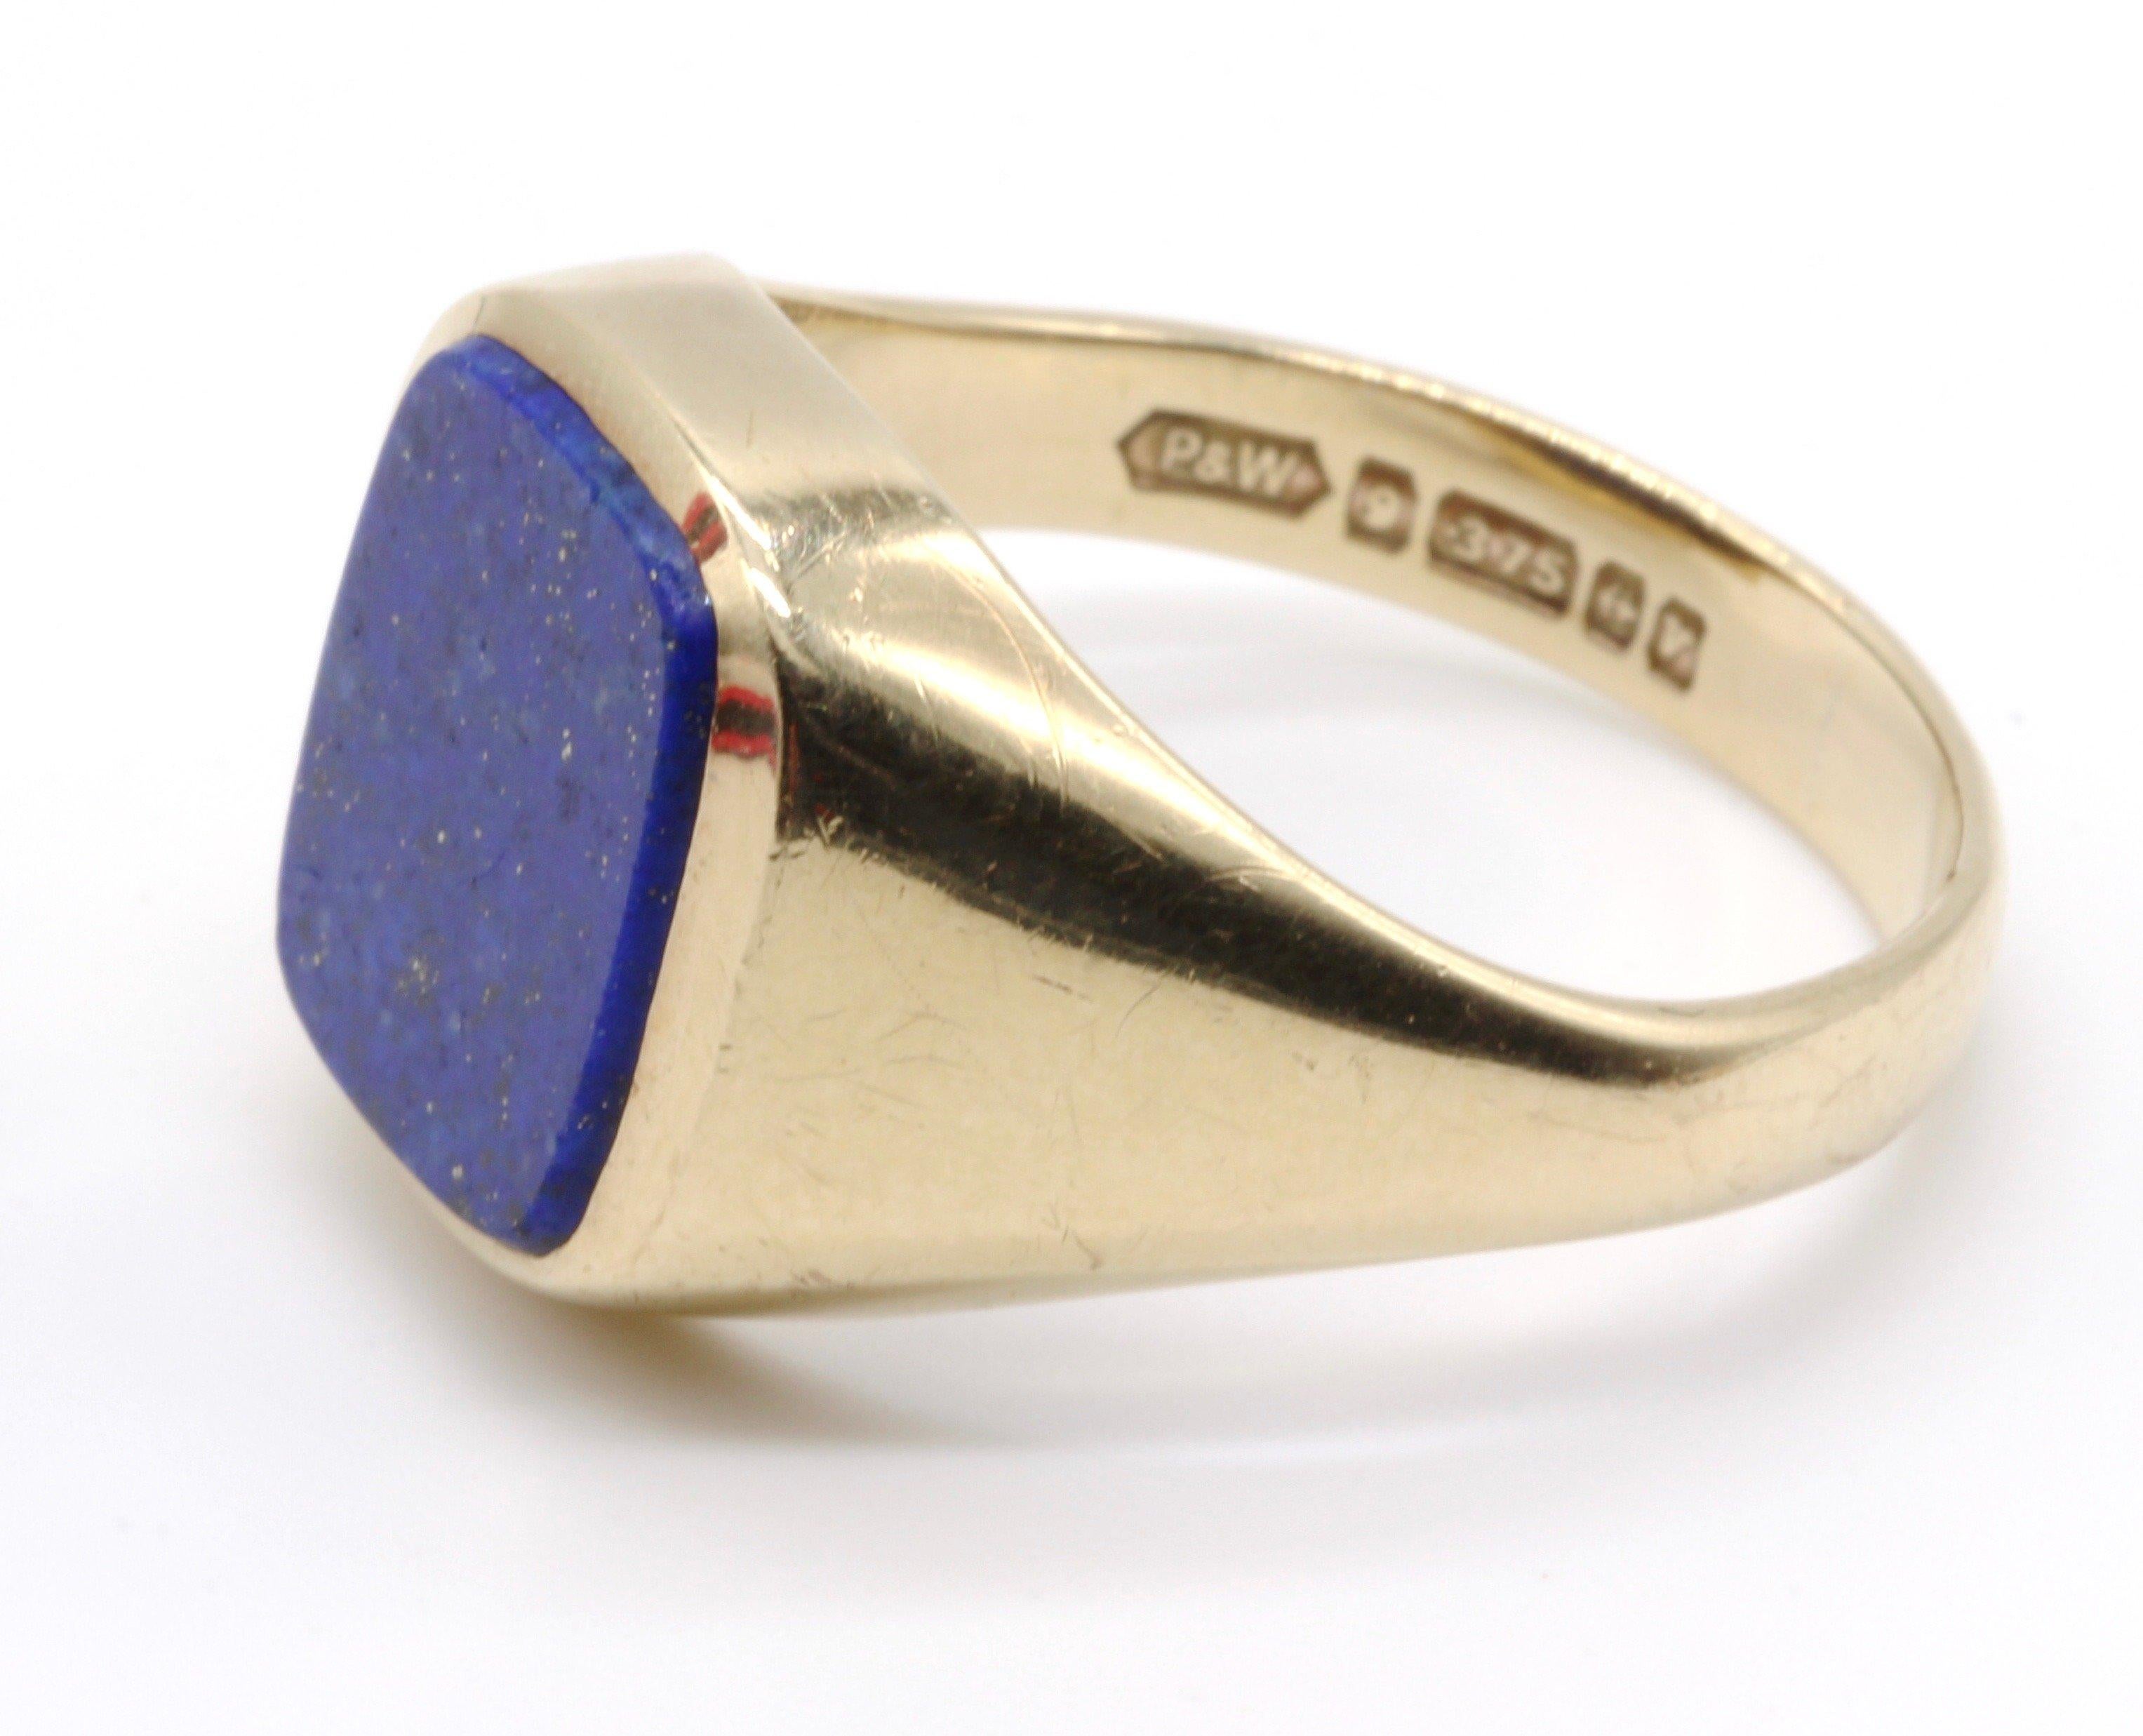 A fine quality 9 Karat yellow gold and lapis lasuli square faced Gentleman's signet ring.
Size  UK   S  
         USA   9.0
Weight 6.36gm.   Diameter of face 14mm.
Hallmarked Birmingham  UK  1970-71